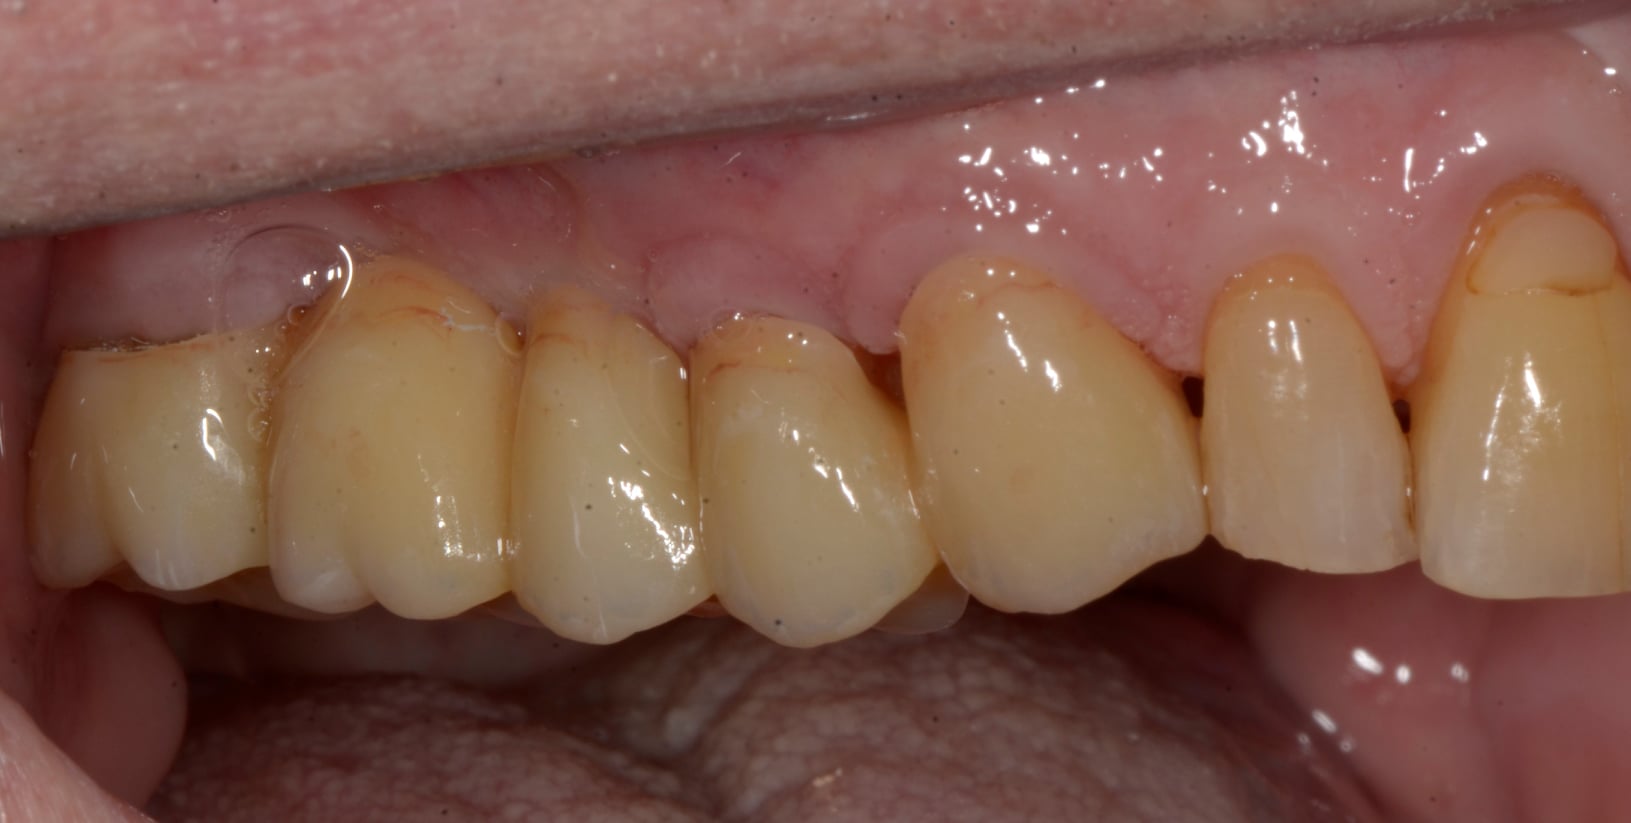 Excellent cosmetic dentistry and lab work isn’t always perfectly shaped white teeth for crowns and bridges, but restorations that blend into the rest of the dentition.